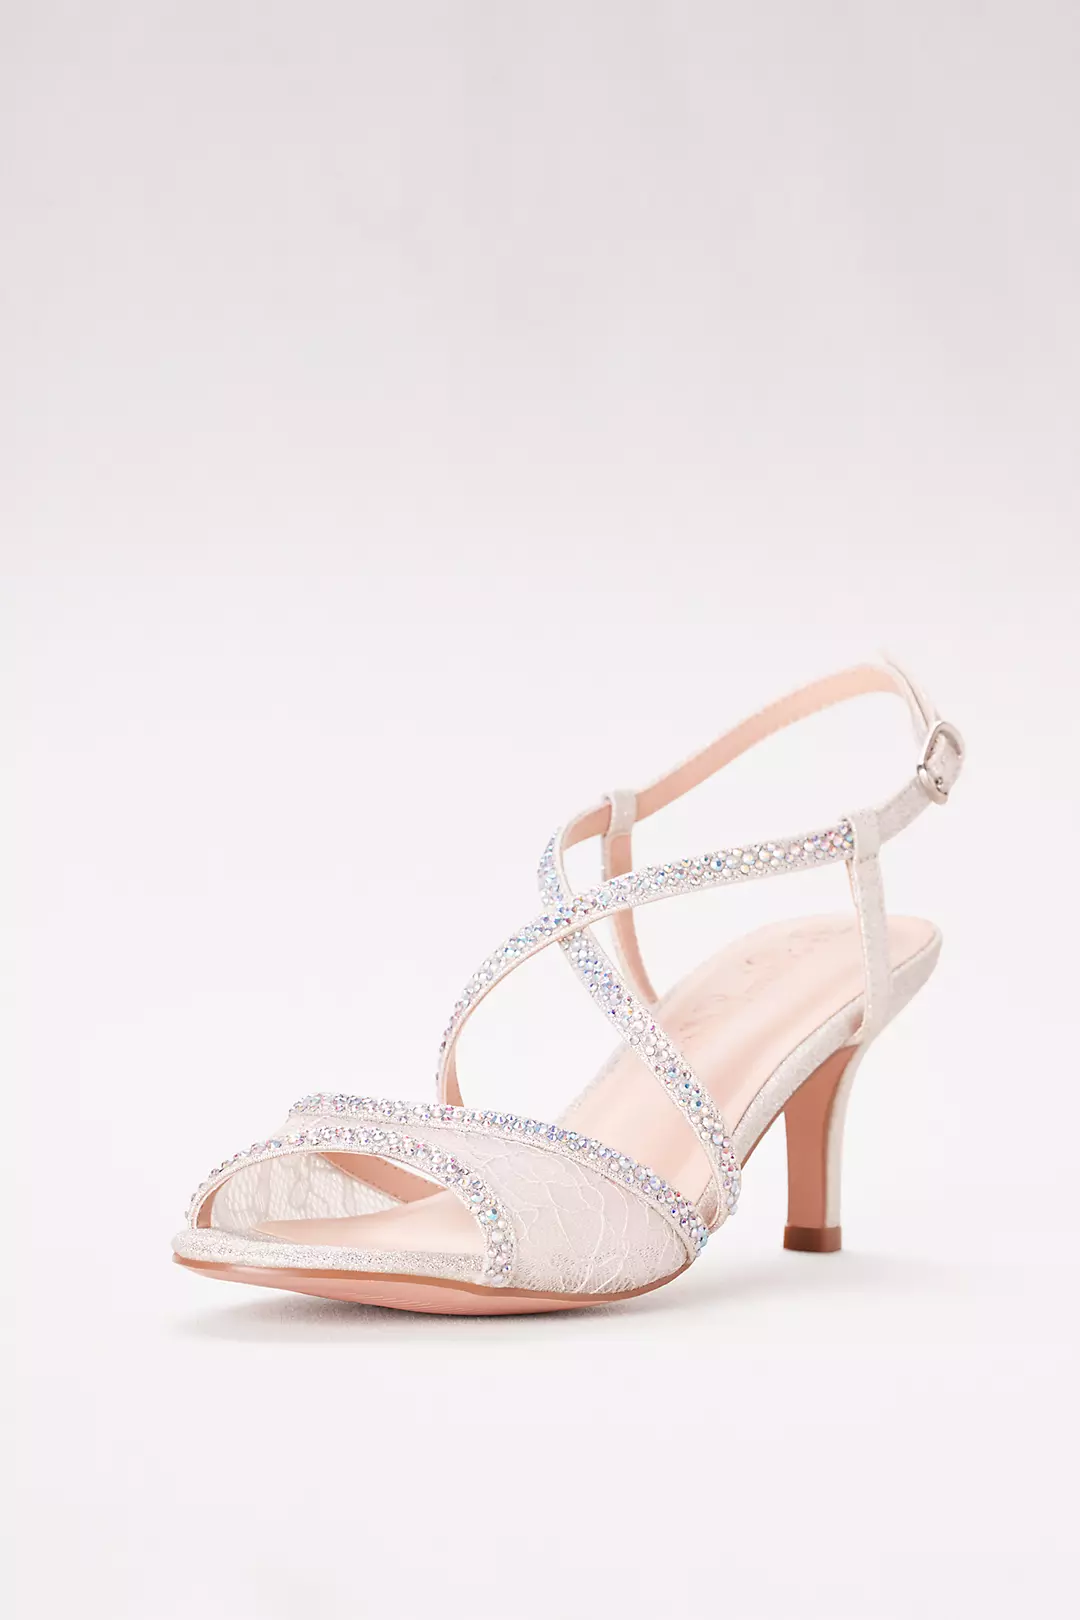 Low Heel Lace Sandals with Crystal Detailing Image